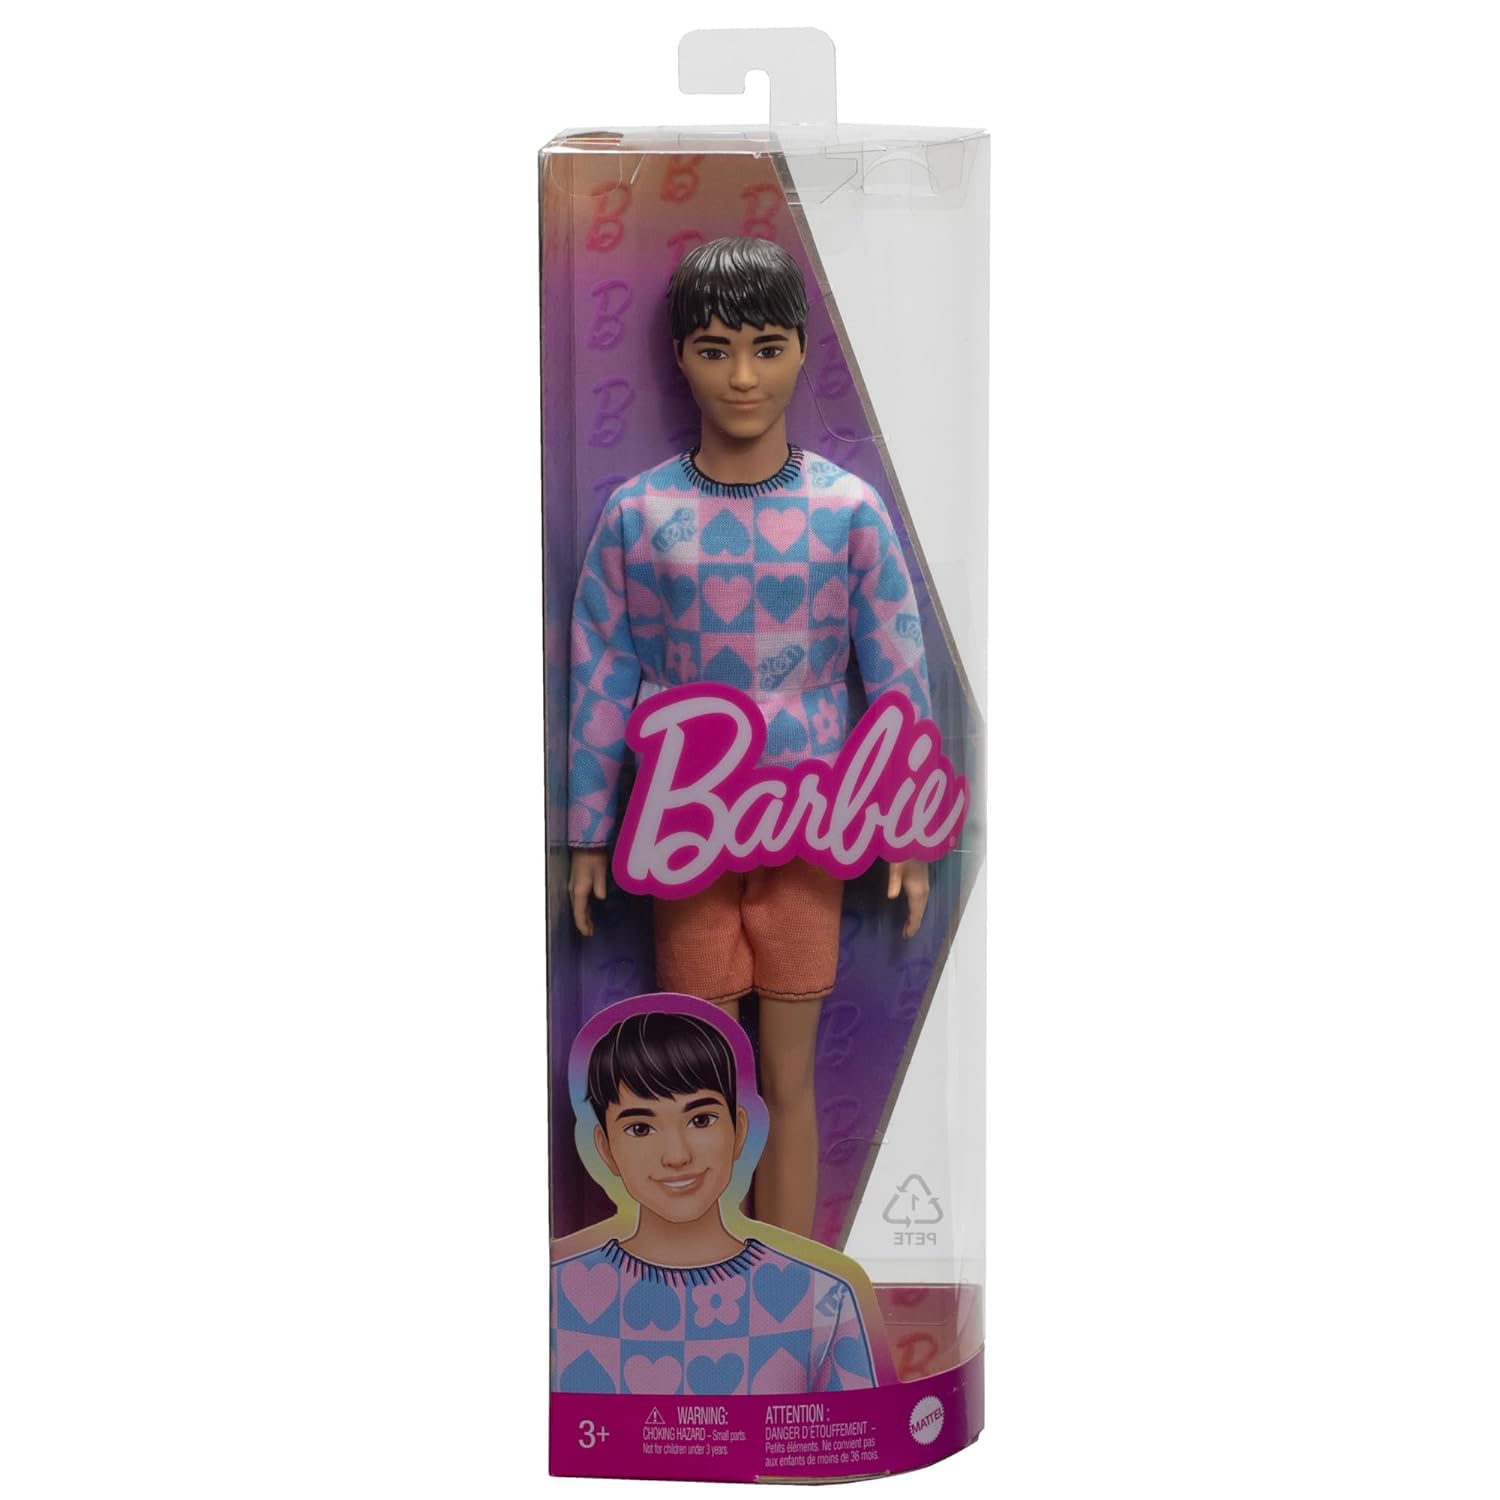 Barbie Fashionistas Ken Doll #219 with Slender Body Wearing a Removable Long-Sleeve Pink & Blue Patterned Shirt & Pink Shorts